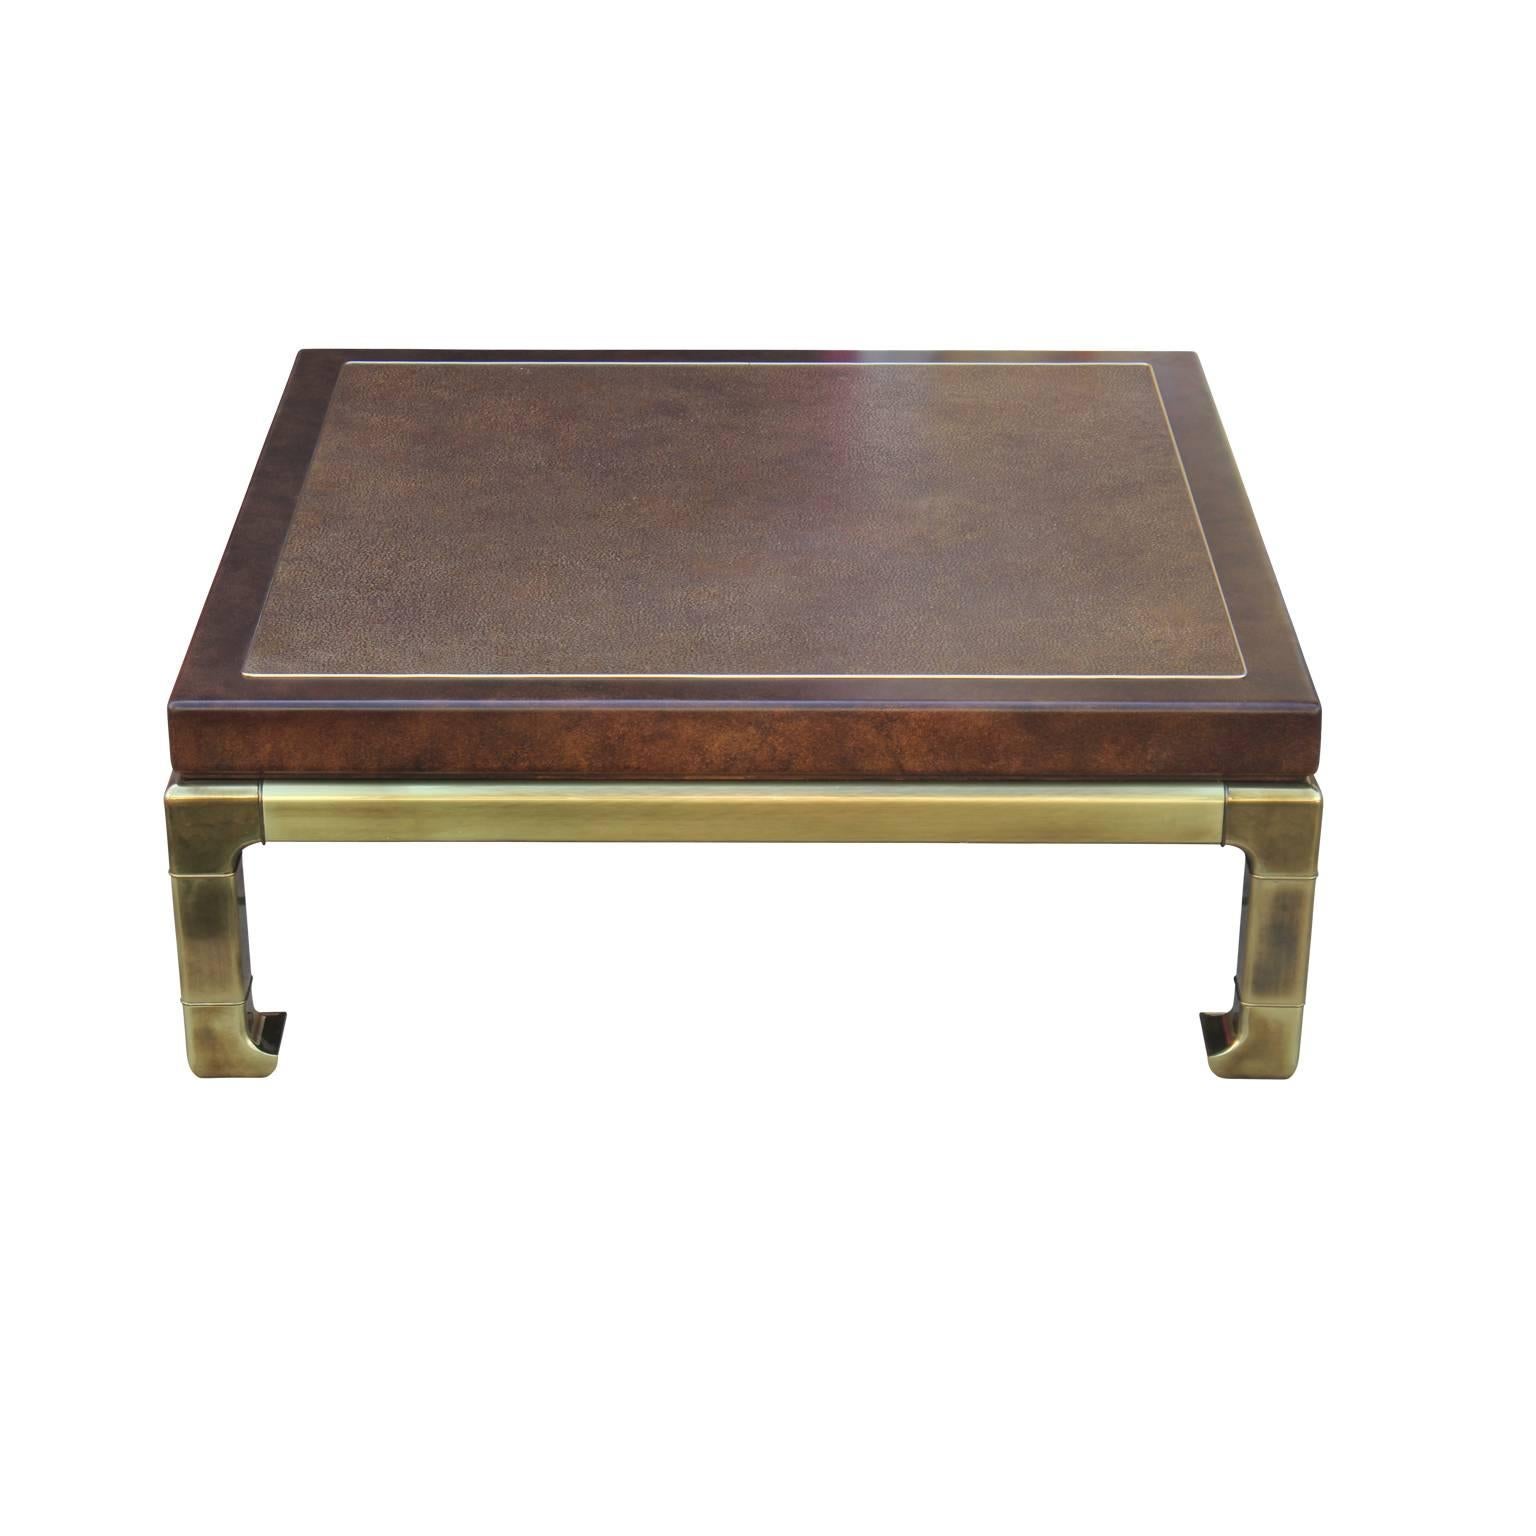 Gorgeous Mastercraft brass coffee table with a brown lacquer faux skin leather top with brass band inlay. Base features brass frieze and legs.